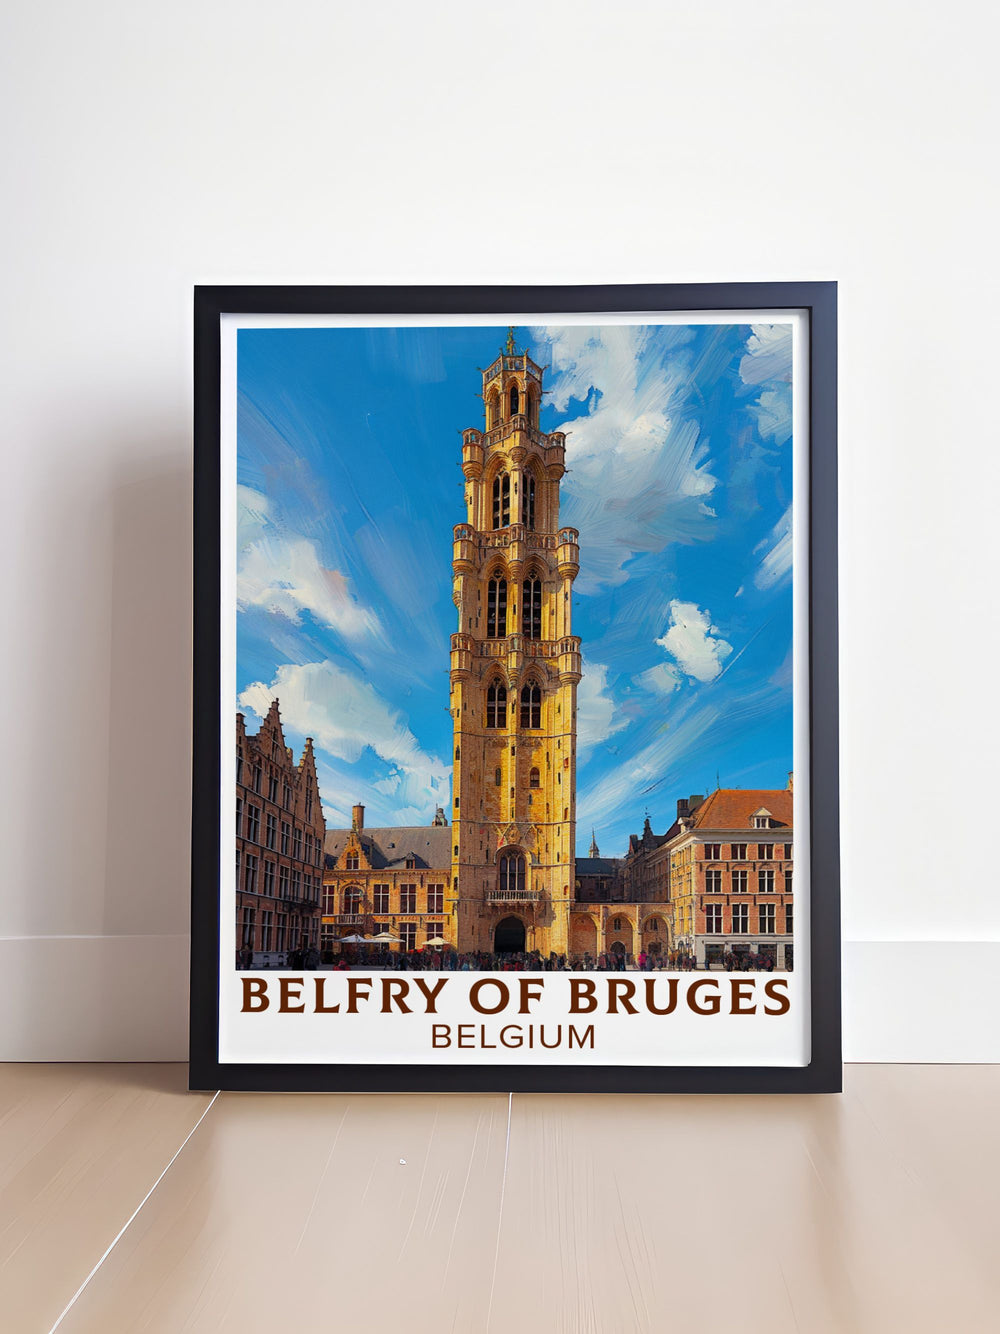 Exquisite Bruges wall art showcasing the majestic Belfry of Bruges. This vintage print highlights the towers architectural beauty and historic significance, making it an ideal piece for art lovers and travel enthusiasts.